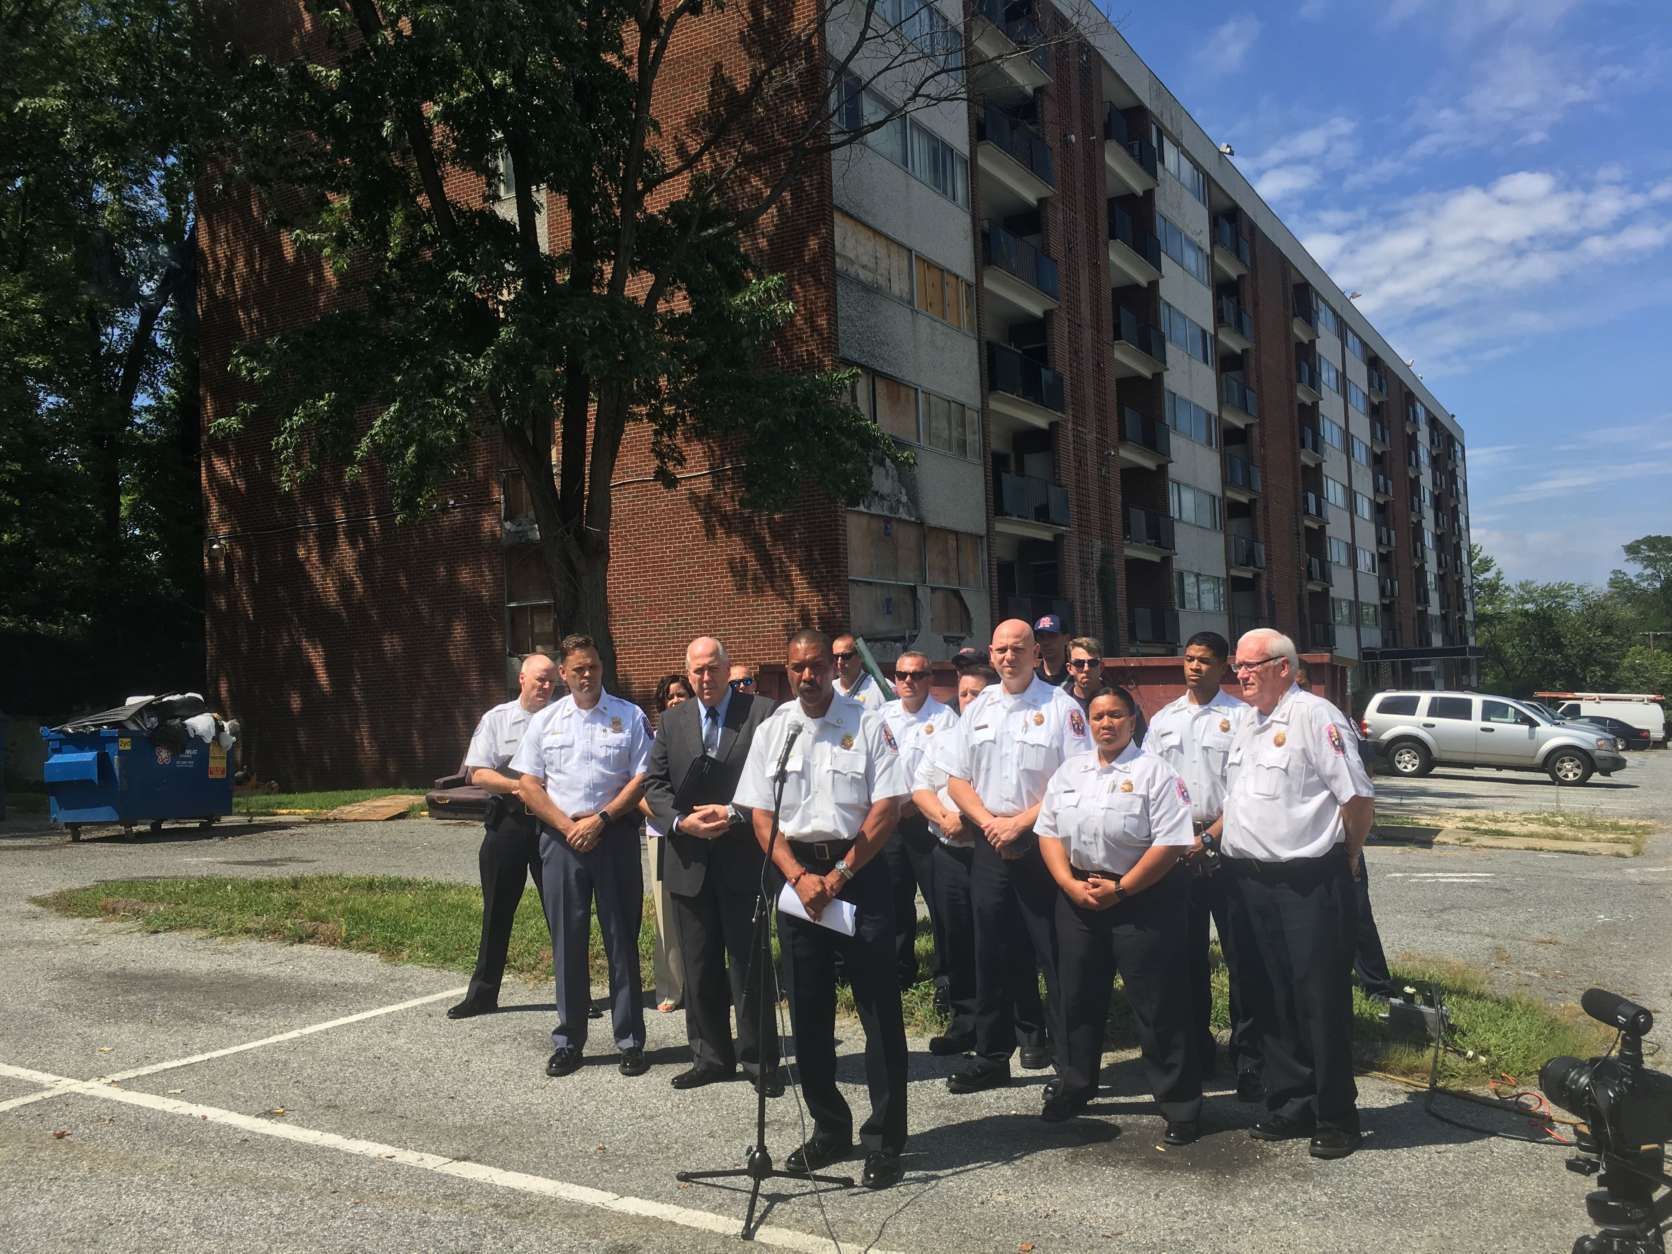 Prince George's County Fire Chief Benjamin Barksadale and other fire officials outside the Lynnhill condominium complex, in Temple Hills on Aug. 18, (WTOP/Mike Murillo)